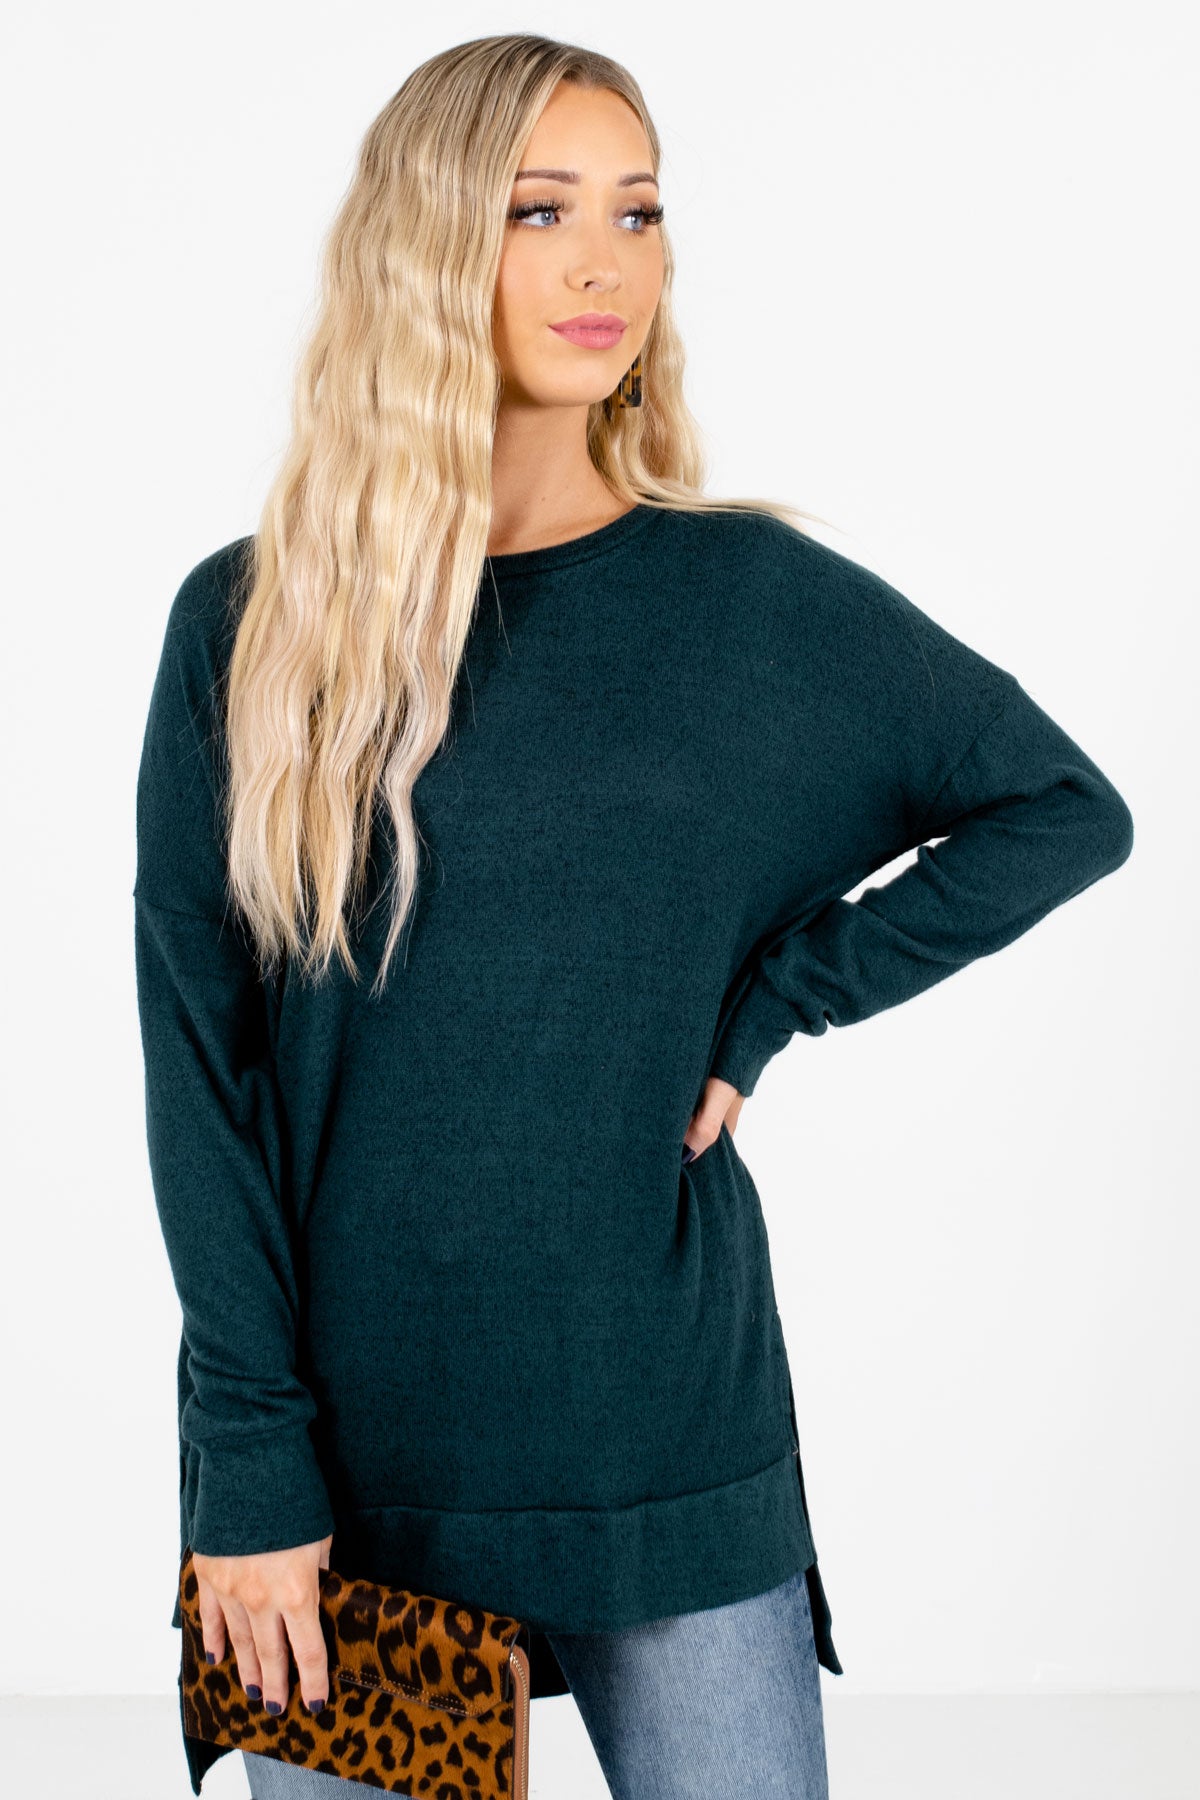 Teal Green High-Quality Soft Material Boutique Tops for Women